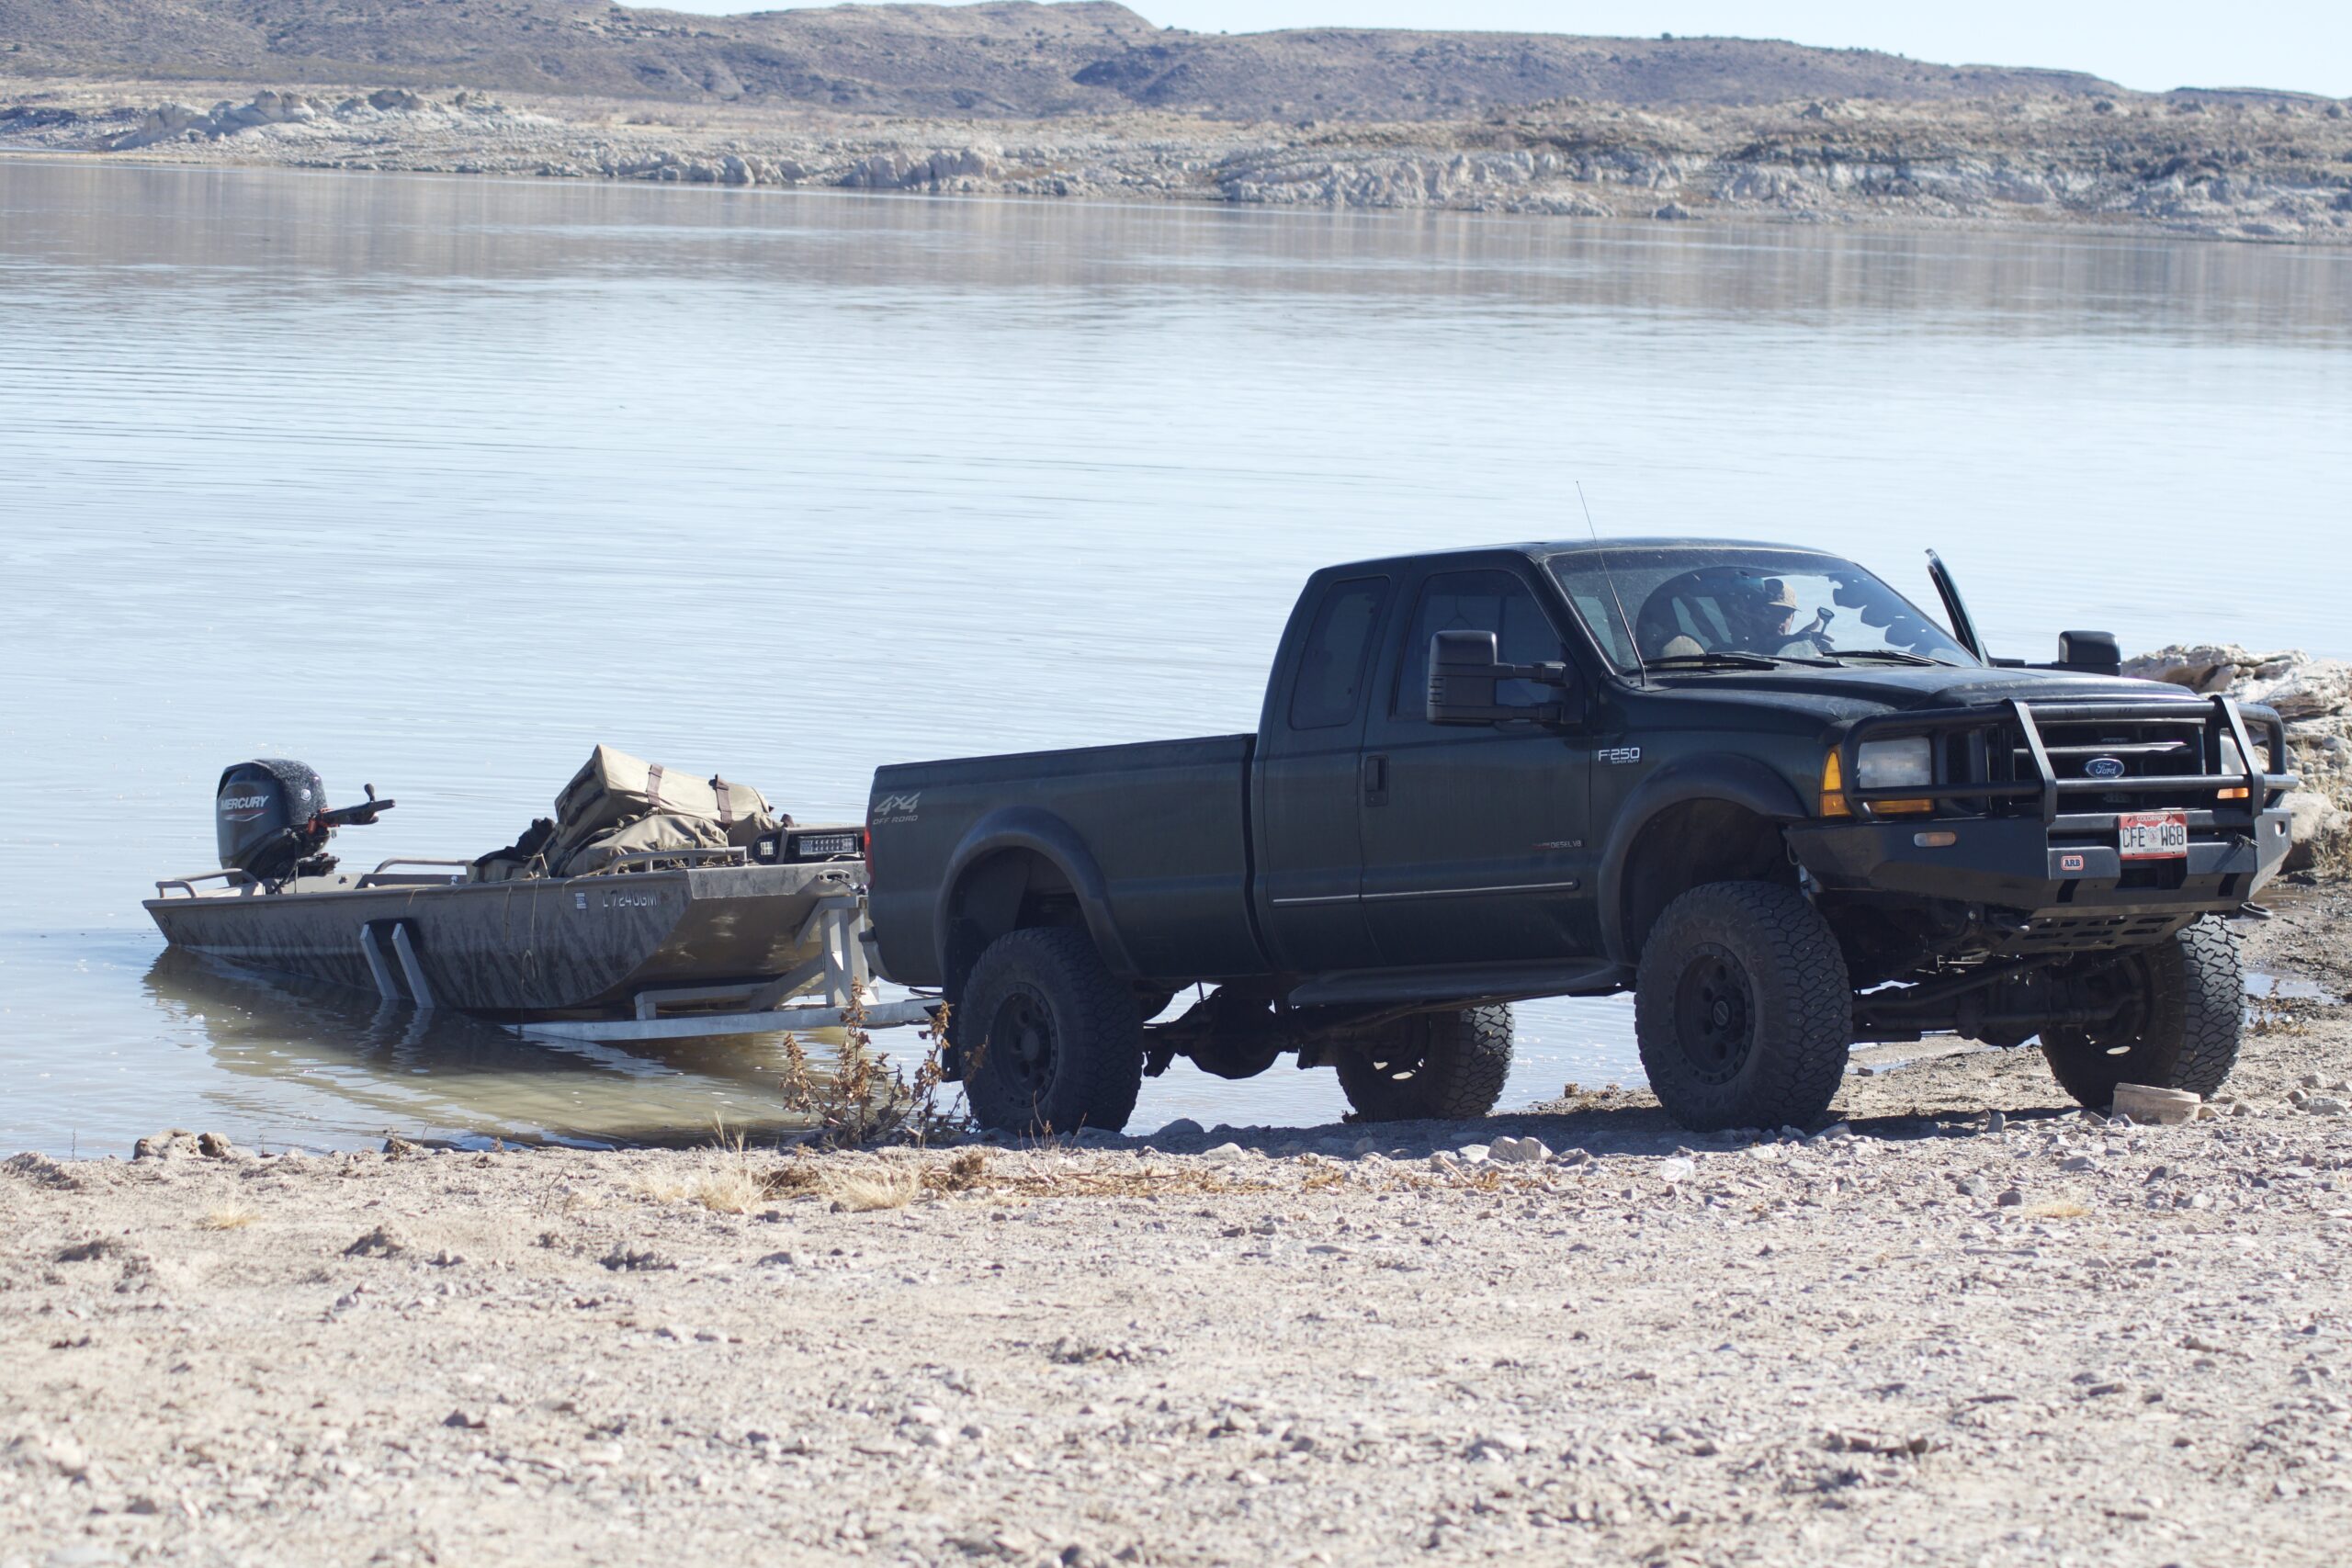 Make a few aftermarket upgrades to your truck to get the most from it.